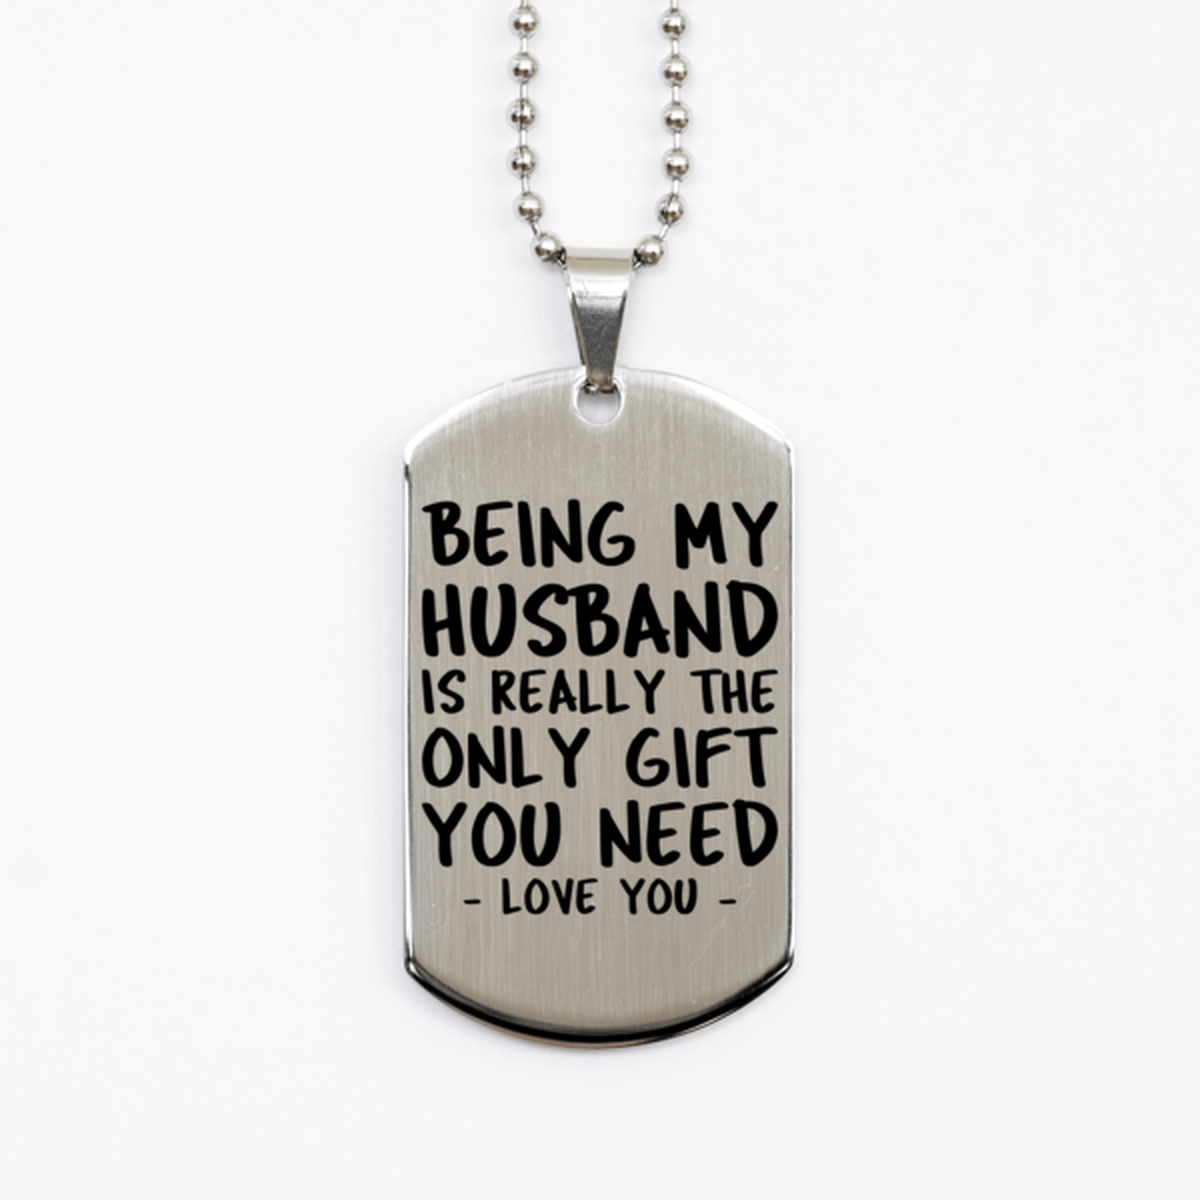 Funny Husband Silver Dog Tag Necklace, Being My Husband Is Really the Only Gift You Need, Best Birthday Gifts for Husband